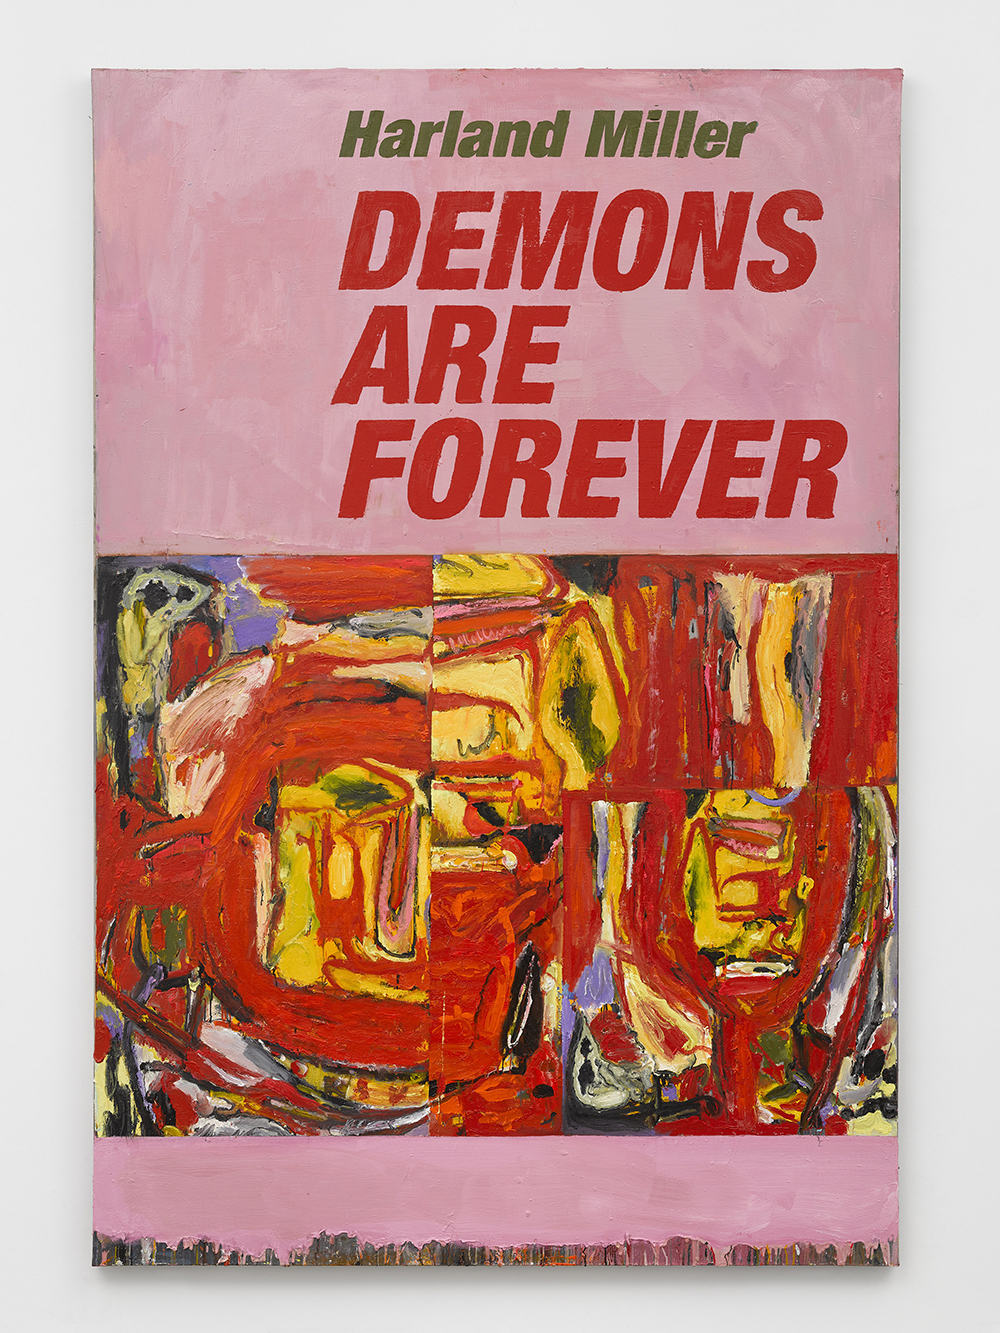 The Wick - Harland Miller,
Demons are forever 2022, © Harland Miller. Photo © White Cube (Theo Christelis)